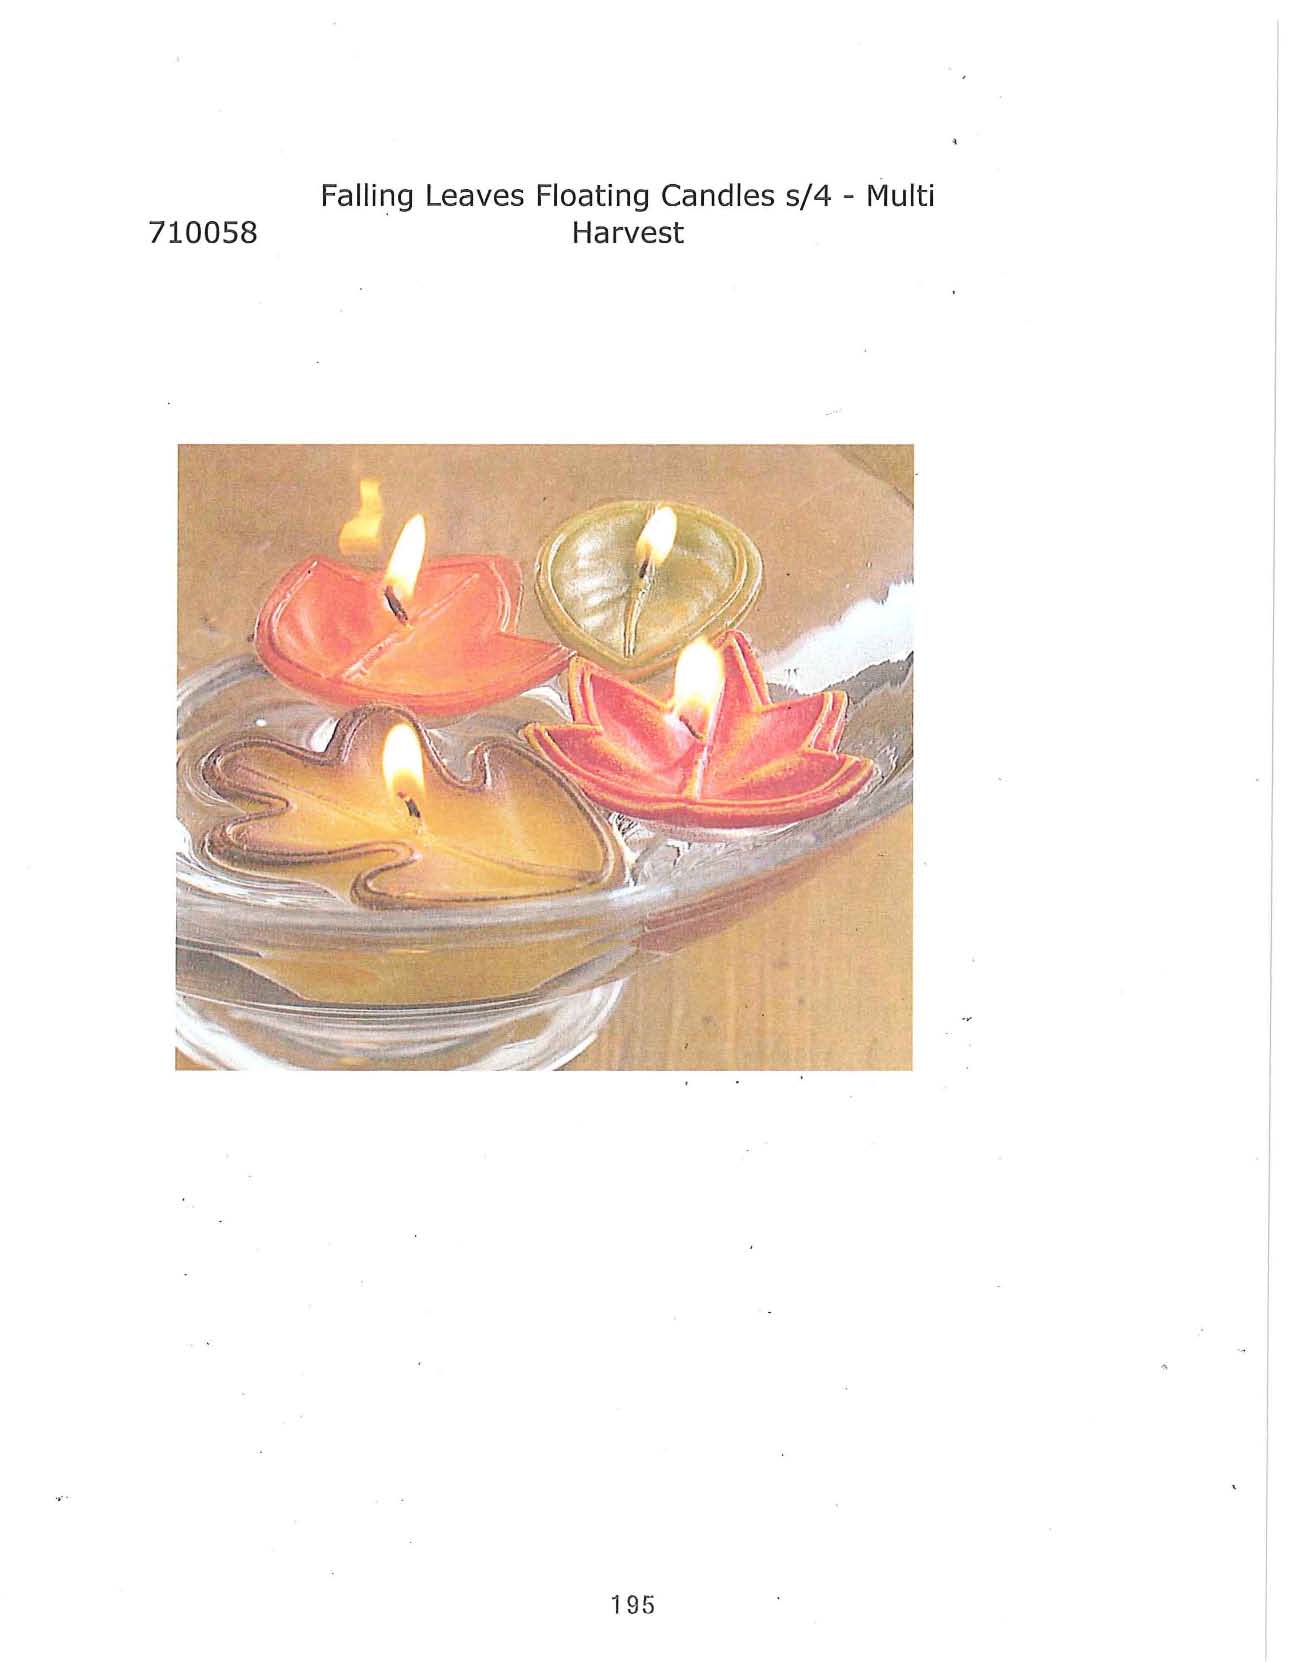 Falling Leaves Floating Candle s/4 - Multi Harvest